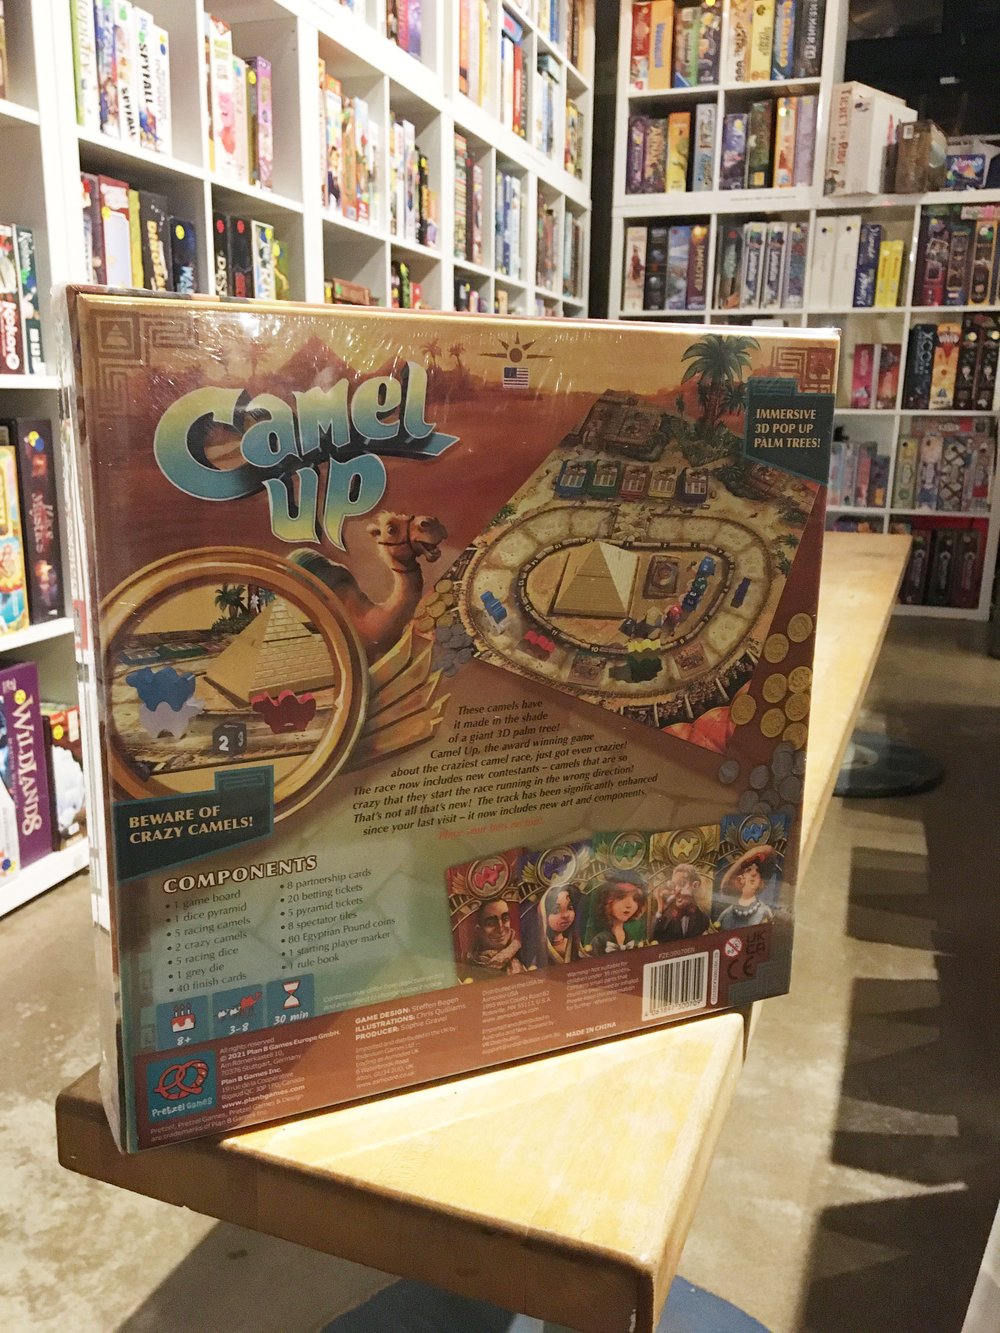 Camel Up (Second Edition)